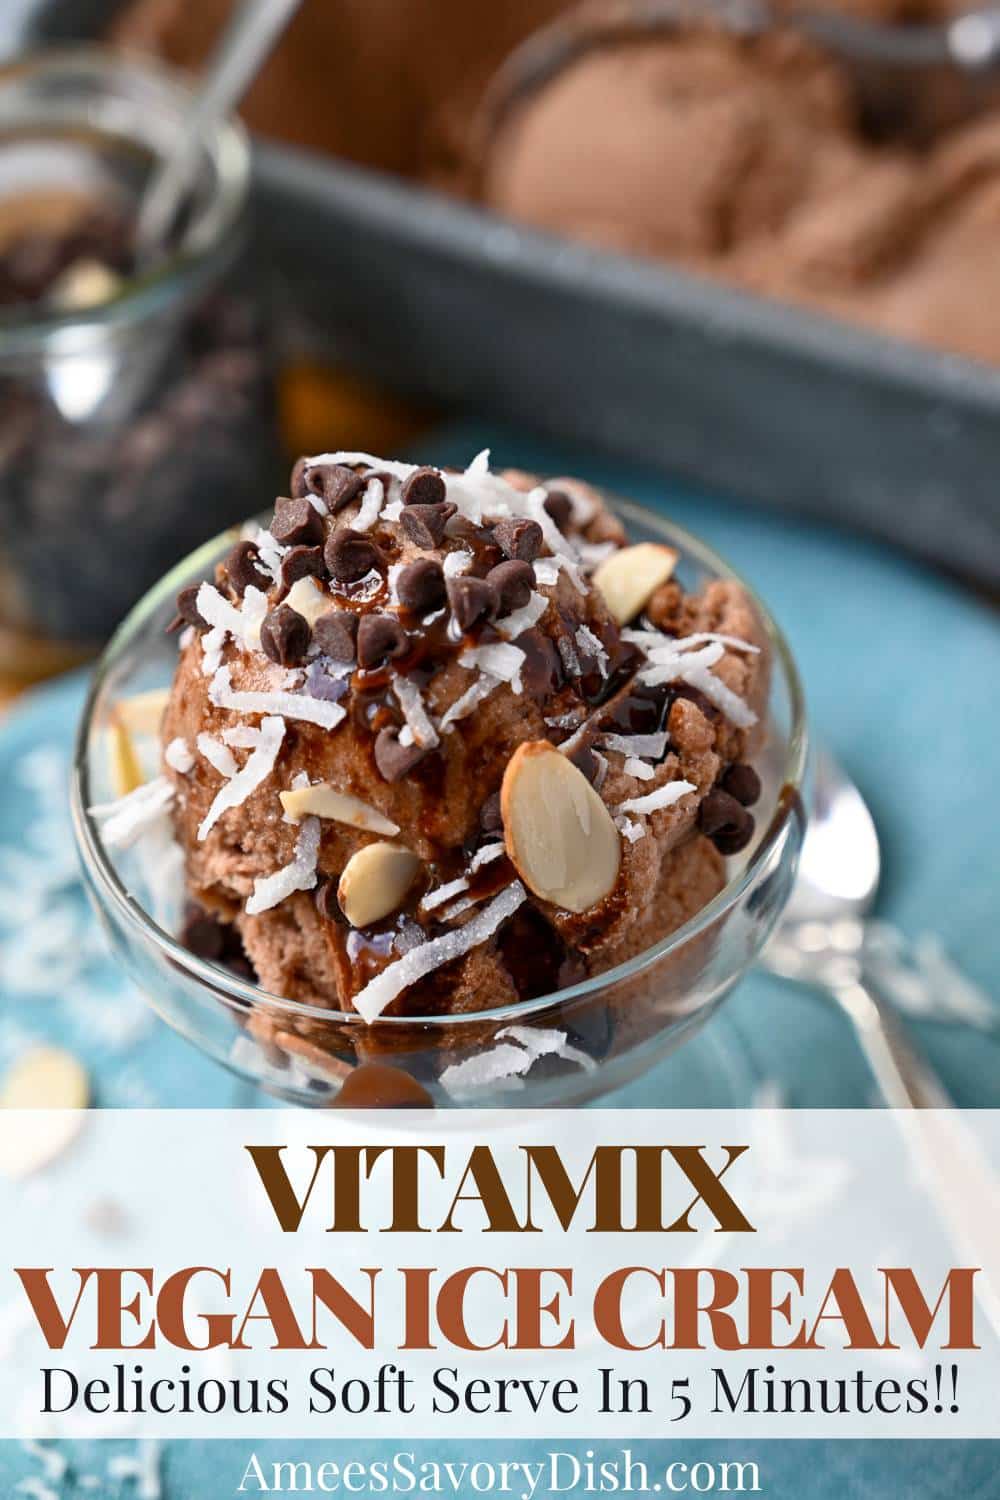 This easy Vitamix Vegan Ice Cream is made with coconut cream, cocoa powder, and dates, with an added protein boost! via @Ameessavorydish